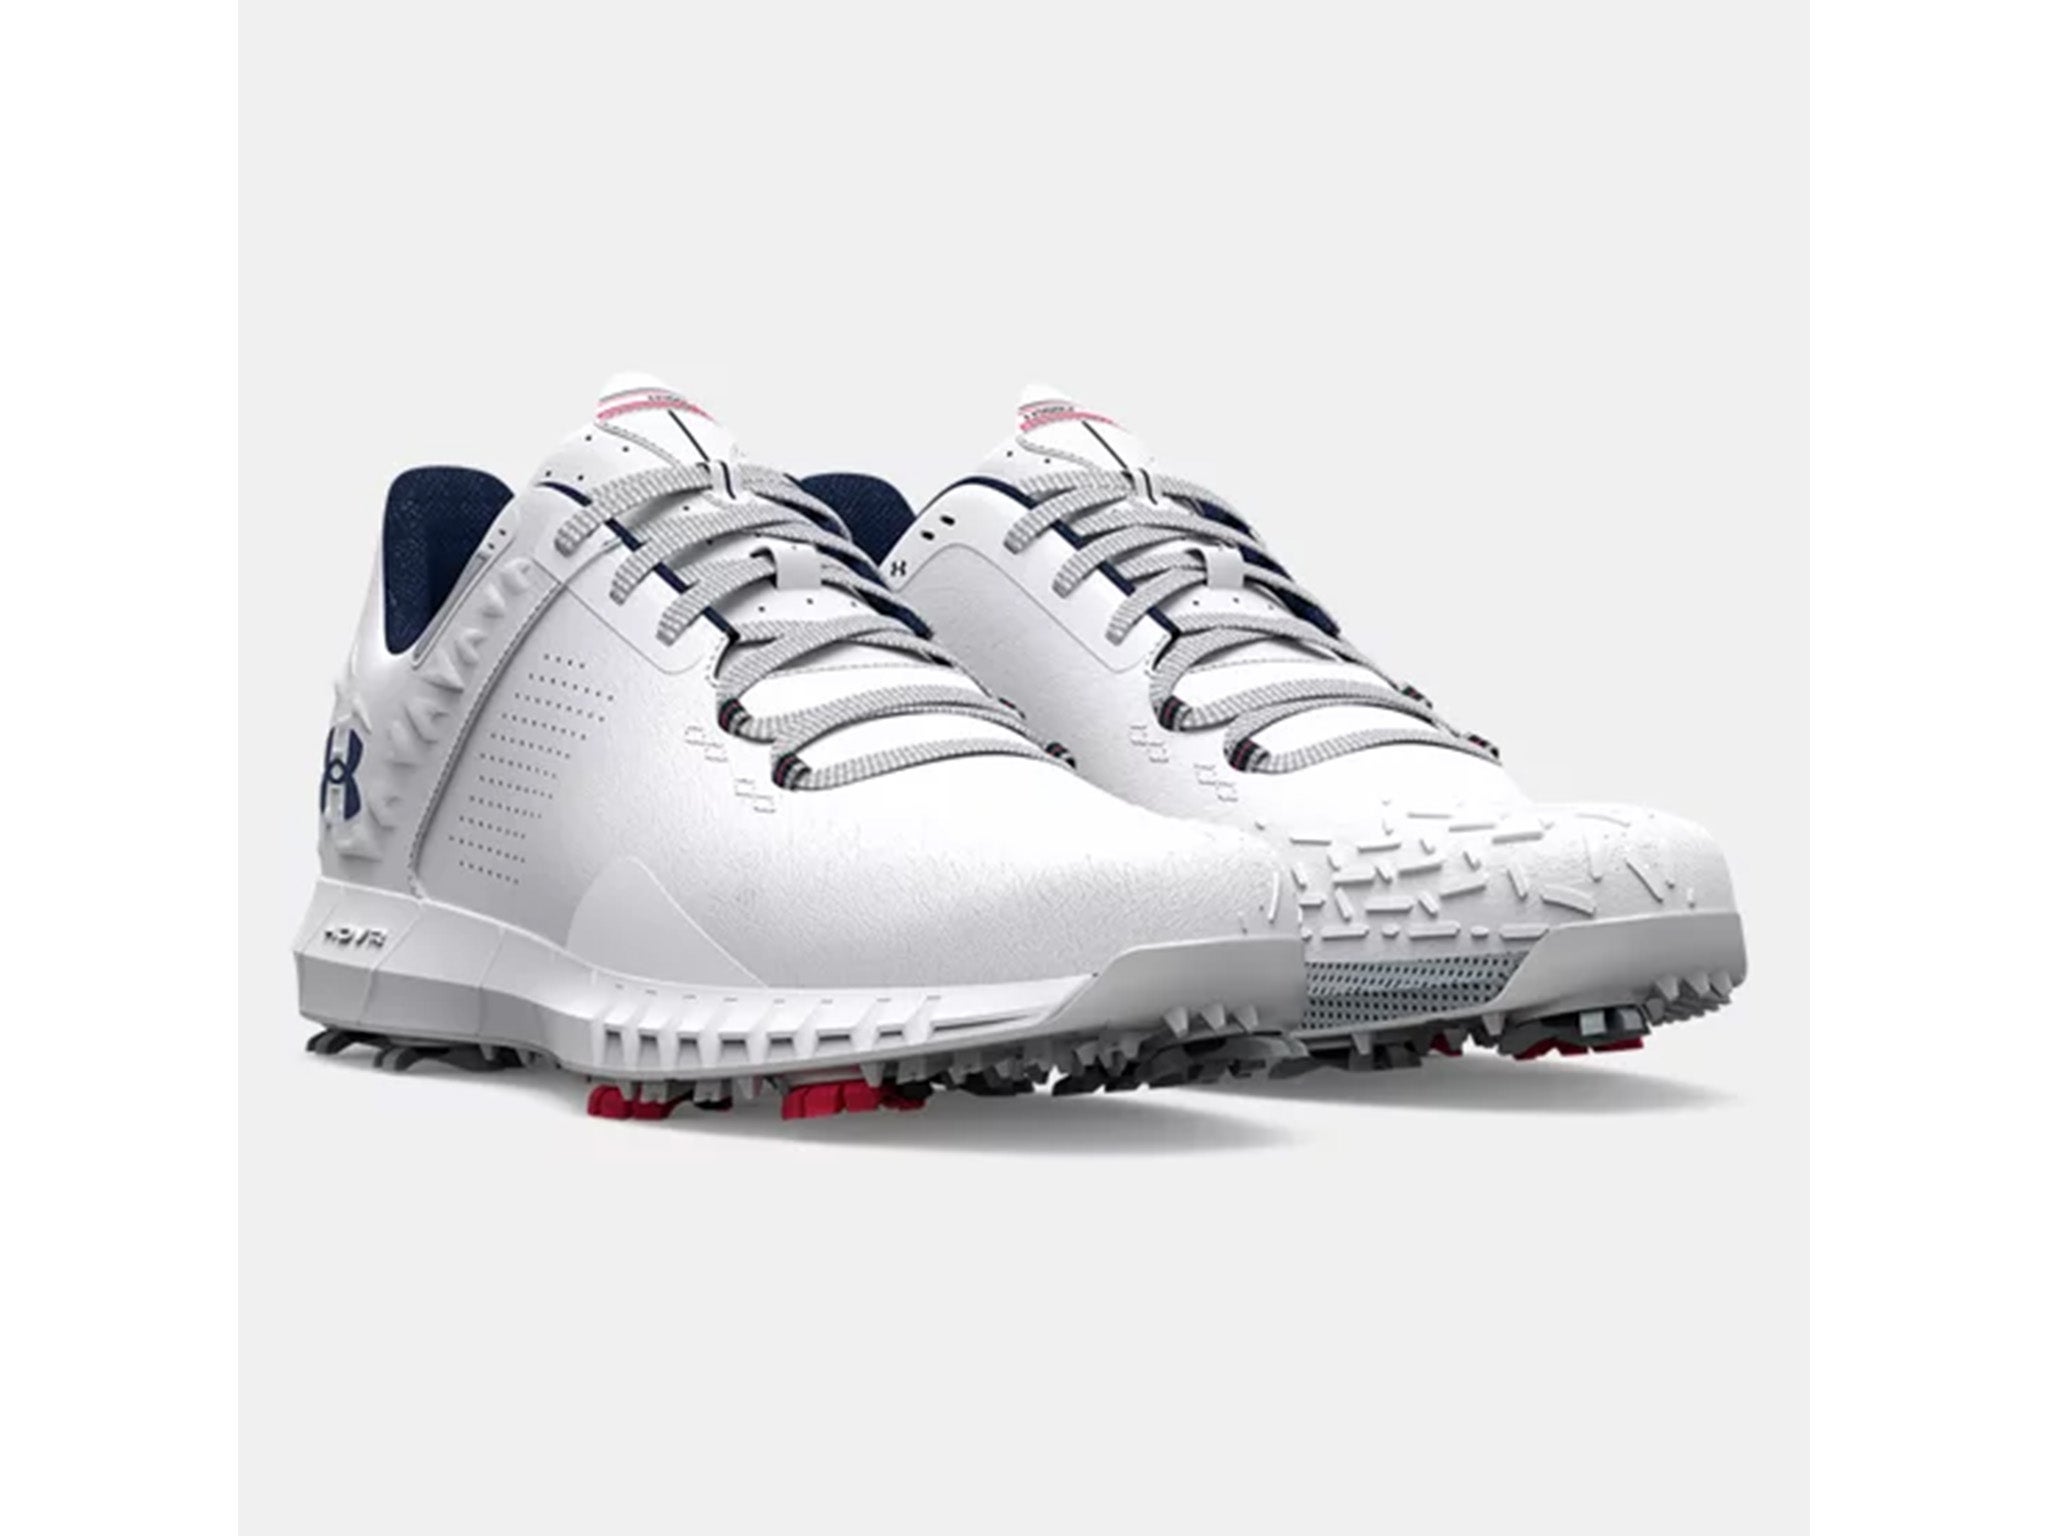 Under Armour HOVR drive 2 golf shoes 